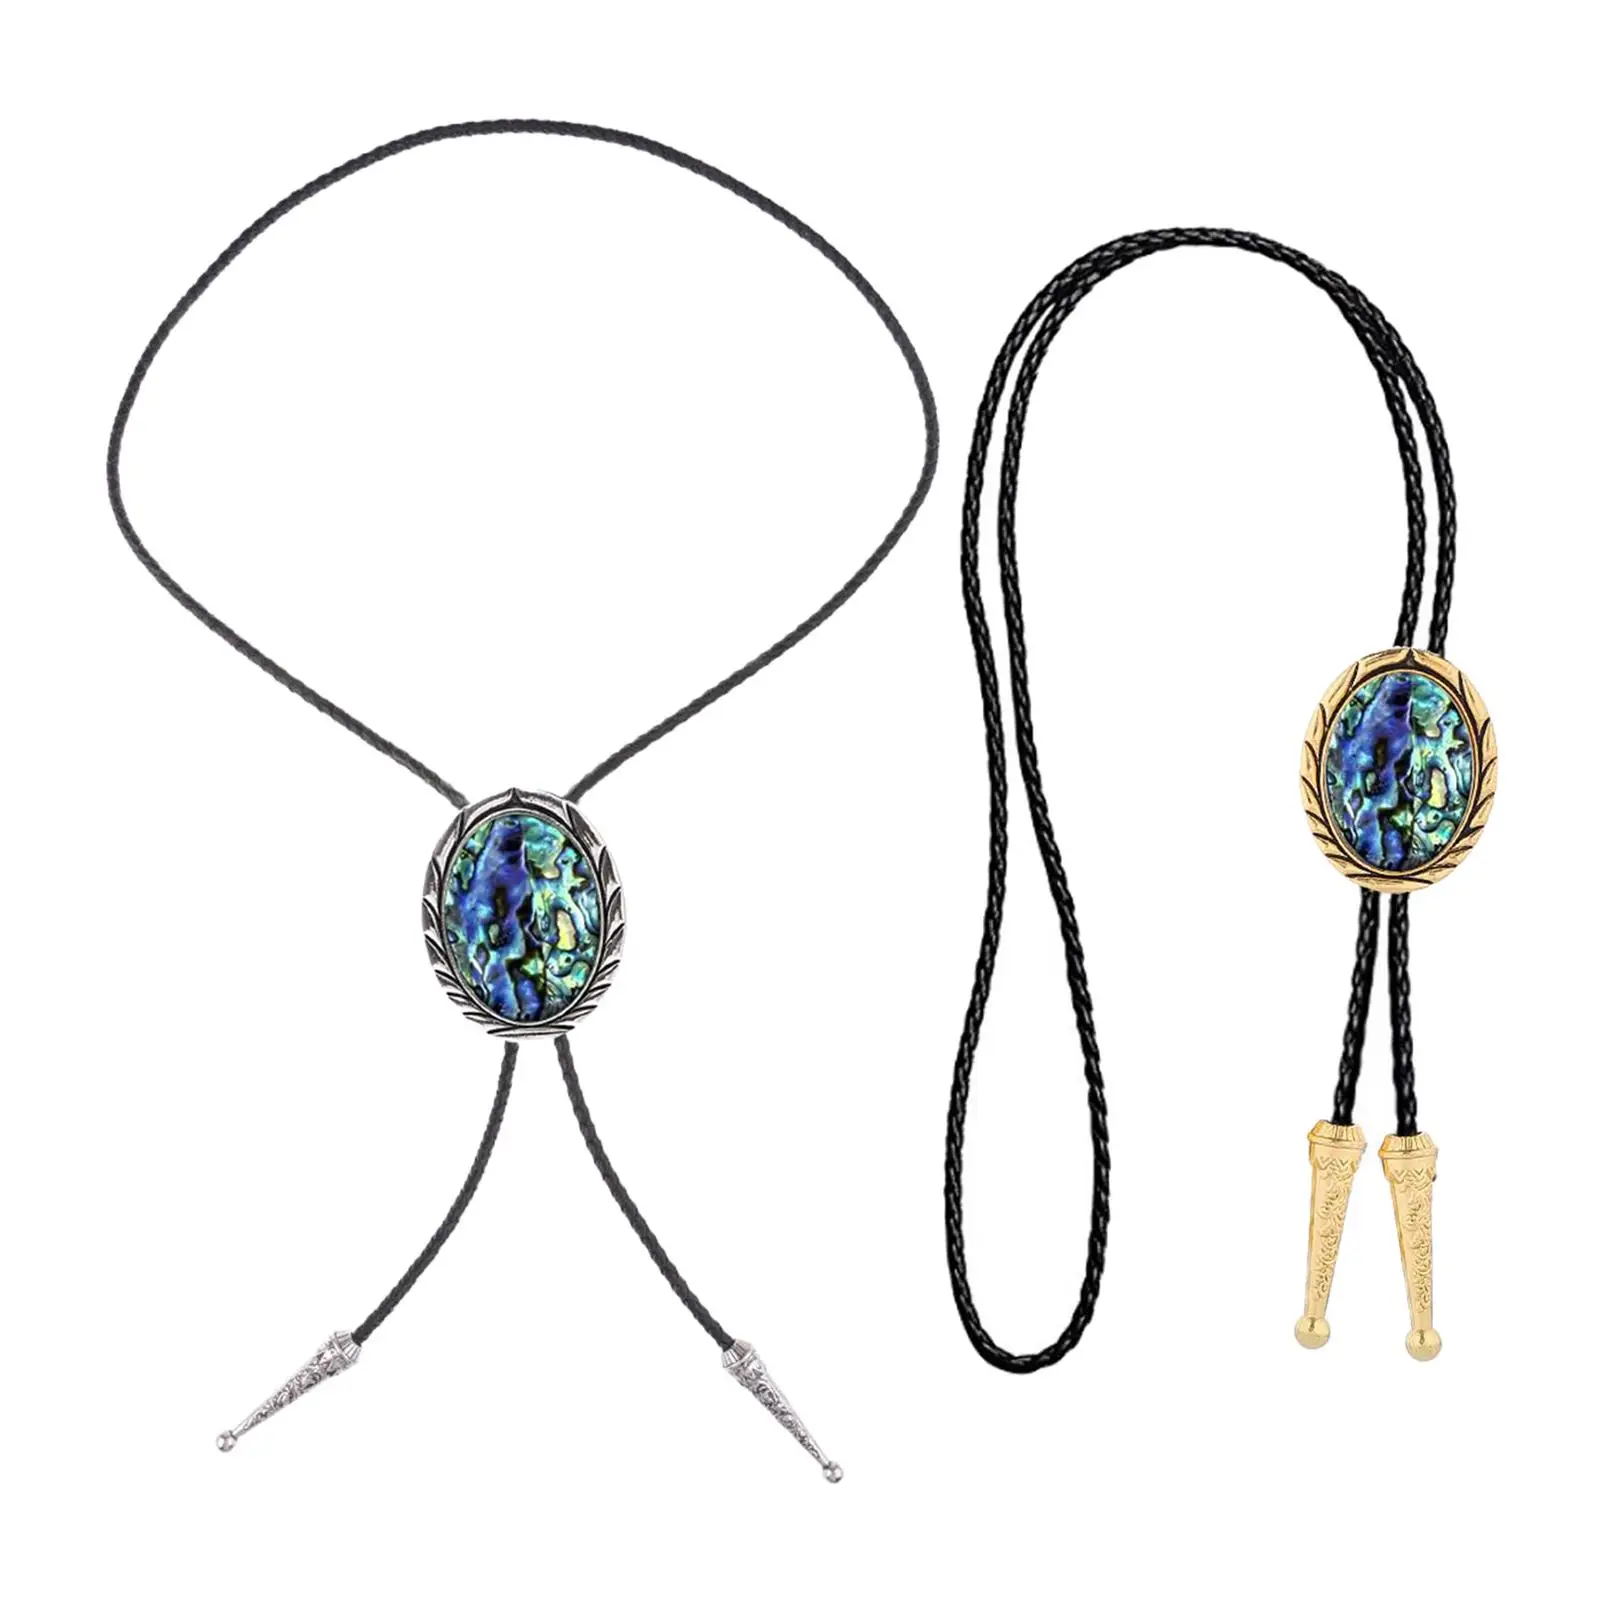 Bolo Tie PU Leather Rope Costume Jewelry Necklace Tie Fashion for Party Prom